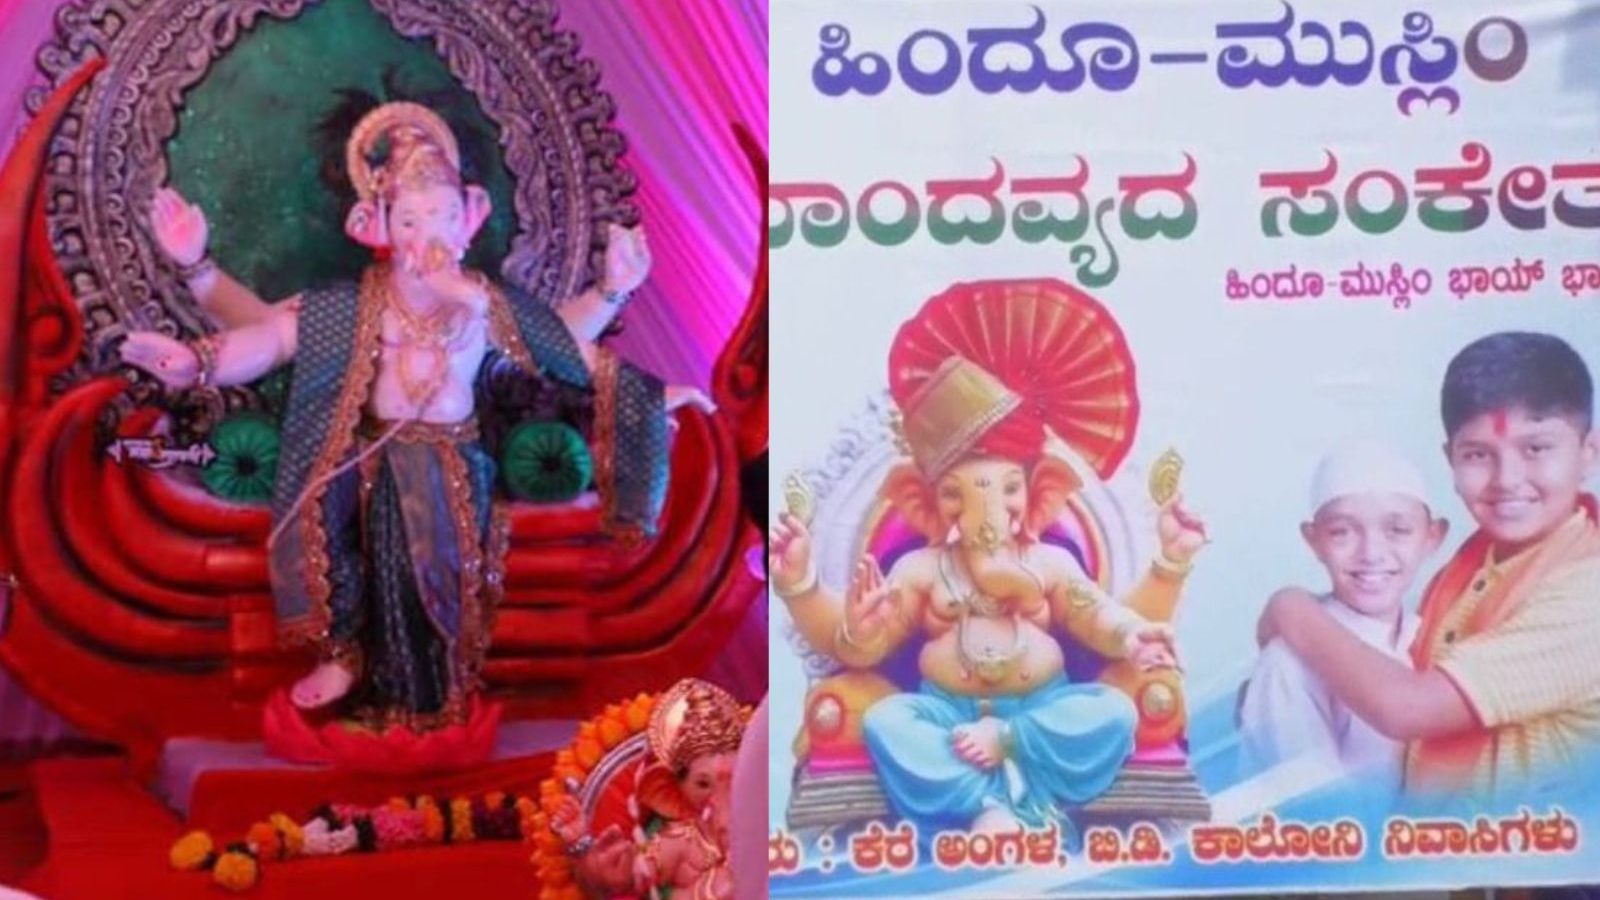 Ganeshotsav Updates: ‘Objectionable’ Material on Shiv Sena Split Seized from Thane Pandal; Hindus & Muslims Celebrate Together in K’taka District